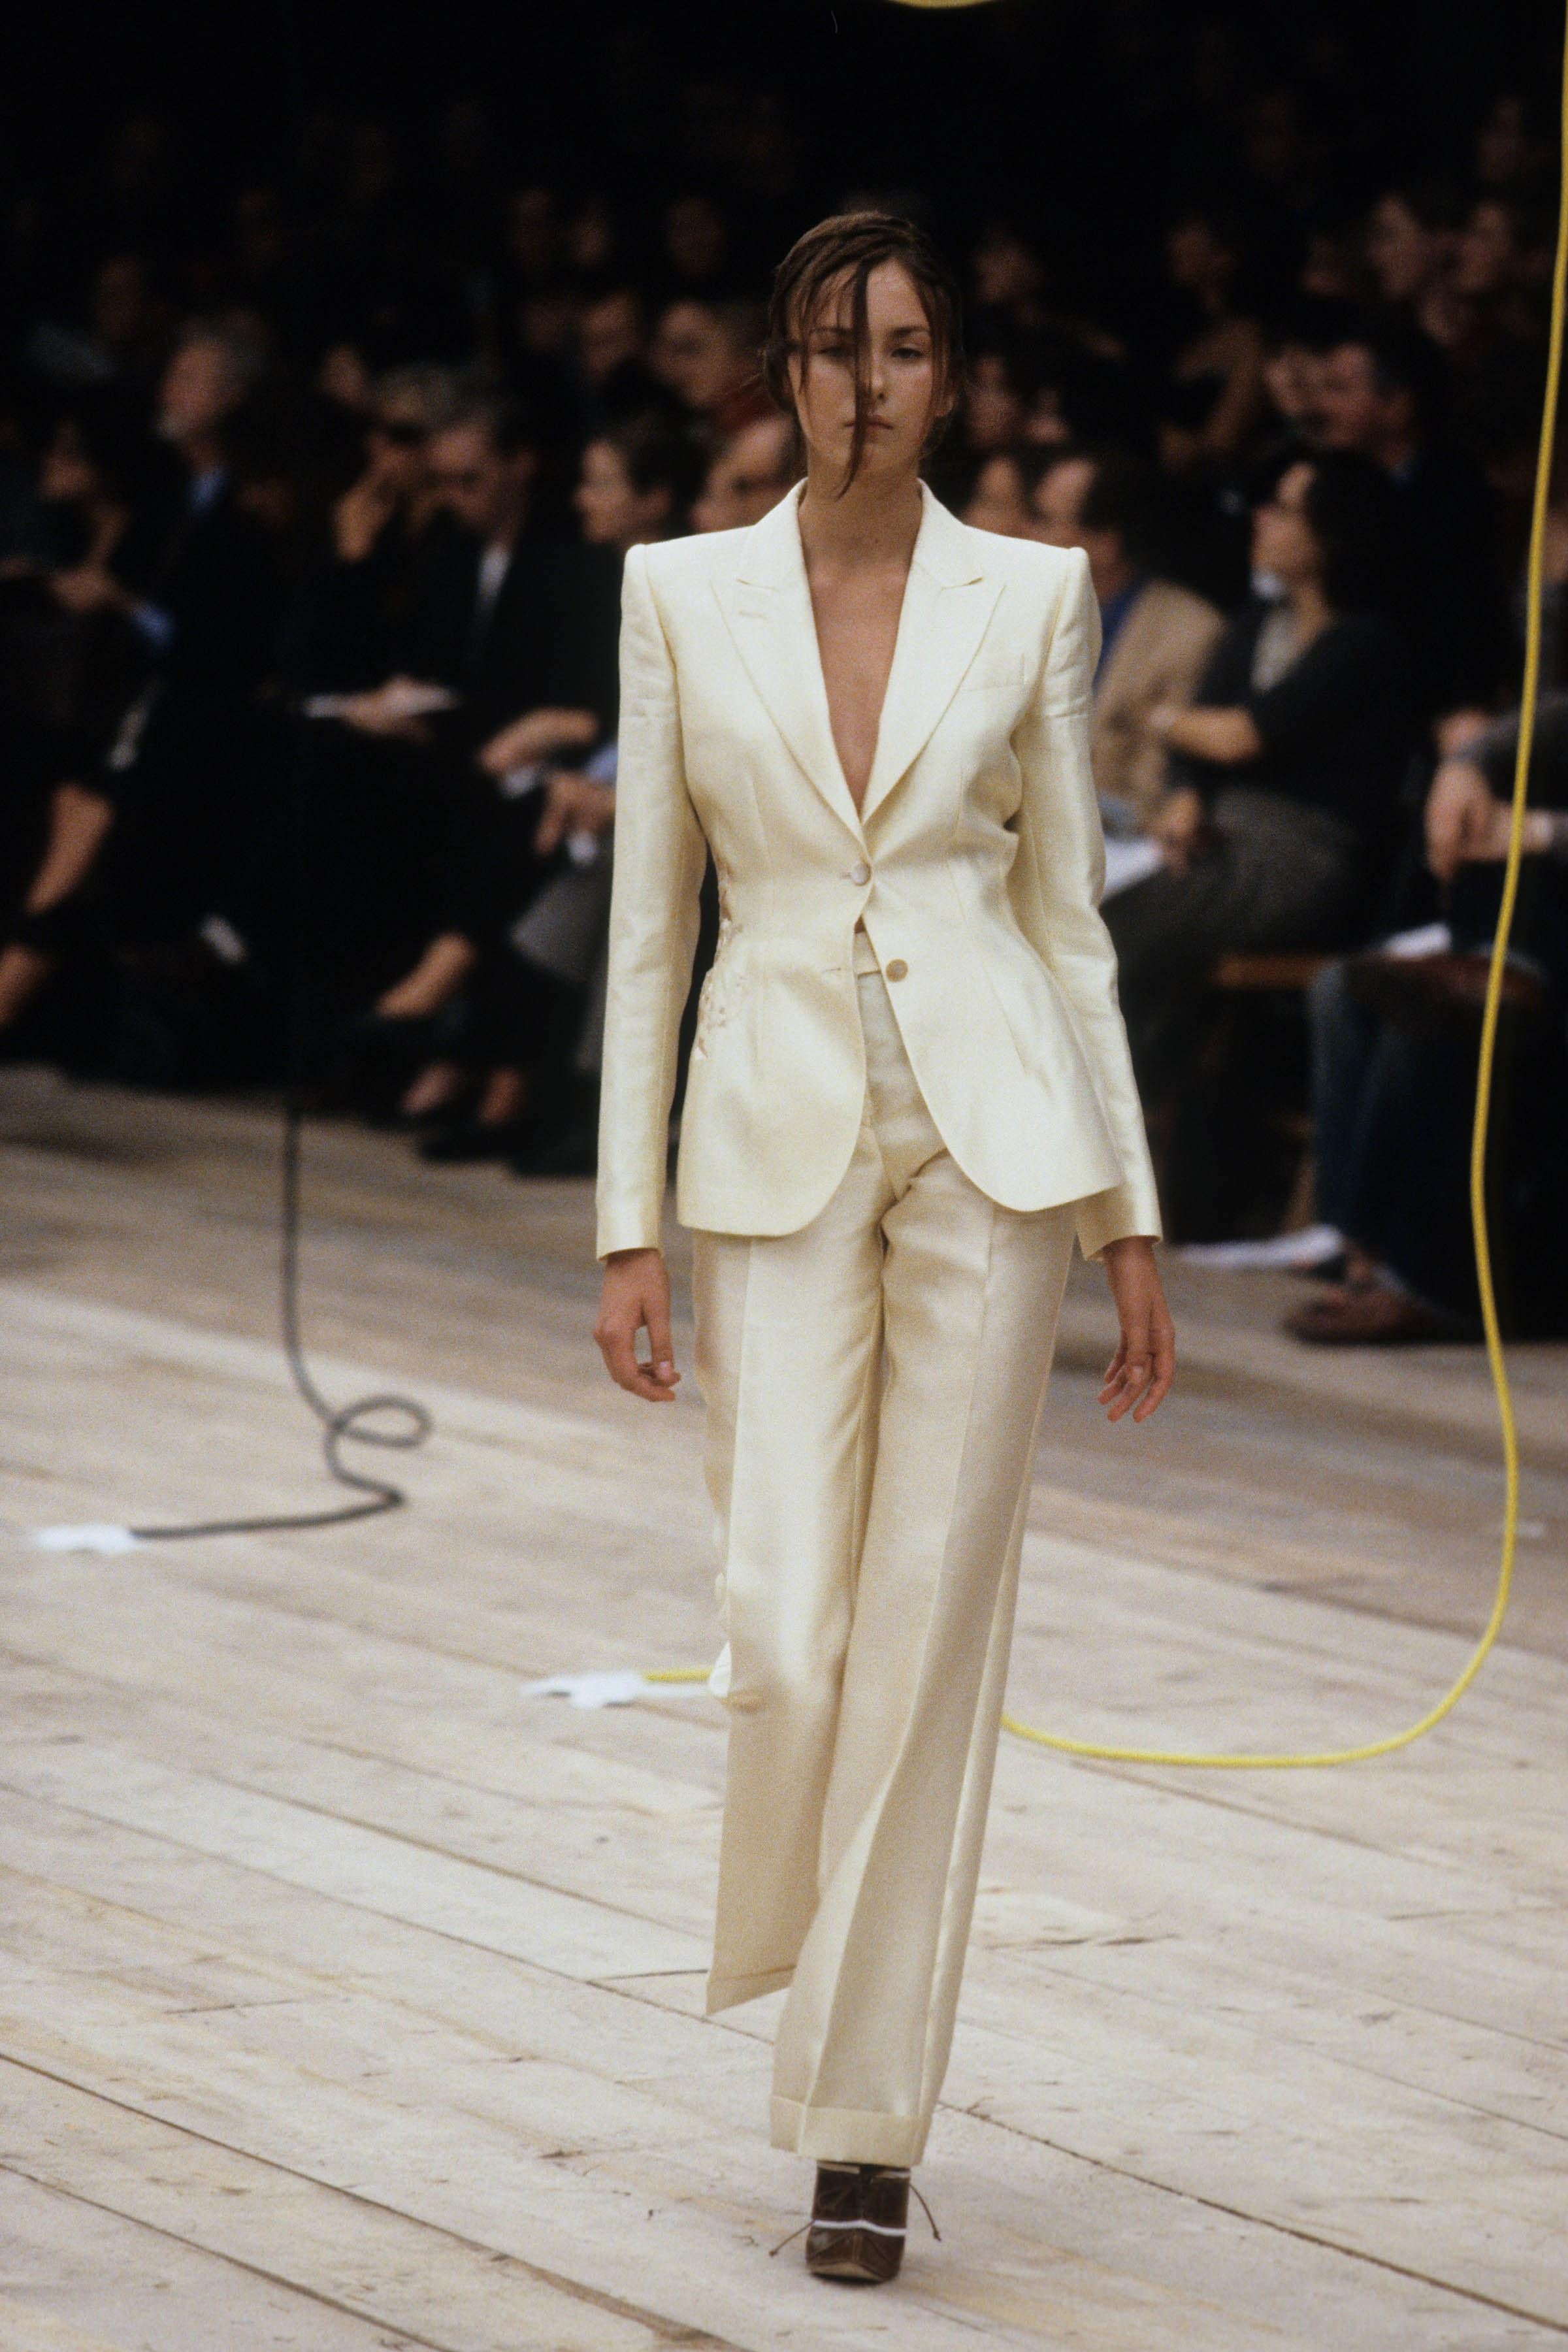 Gorgeous Alexander McQueen runway look 52/76 creme silk jacket from his documented 1999 spring-summer collection. This highly stylized piece is a perfect example of why the magical of Alexander McQueen is so missed. Made of the highest quality silk